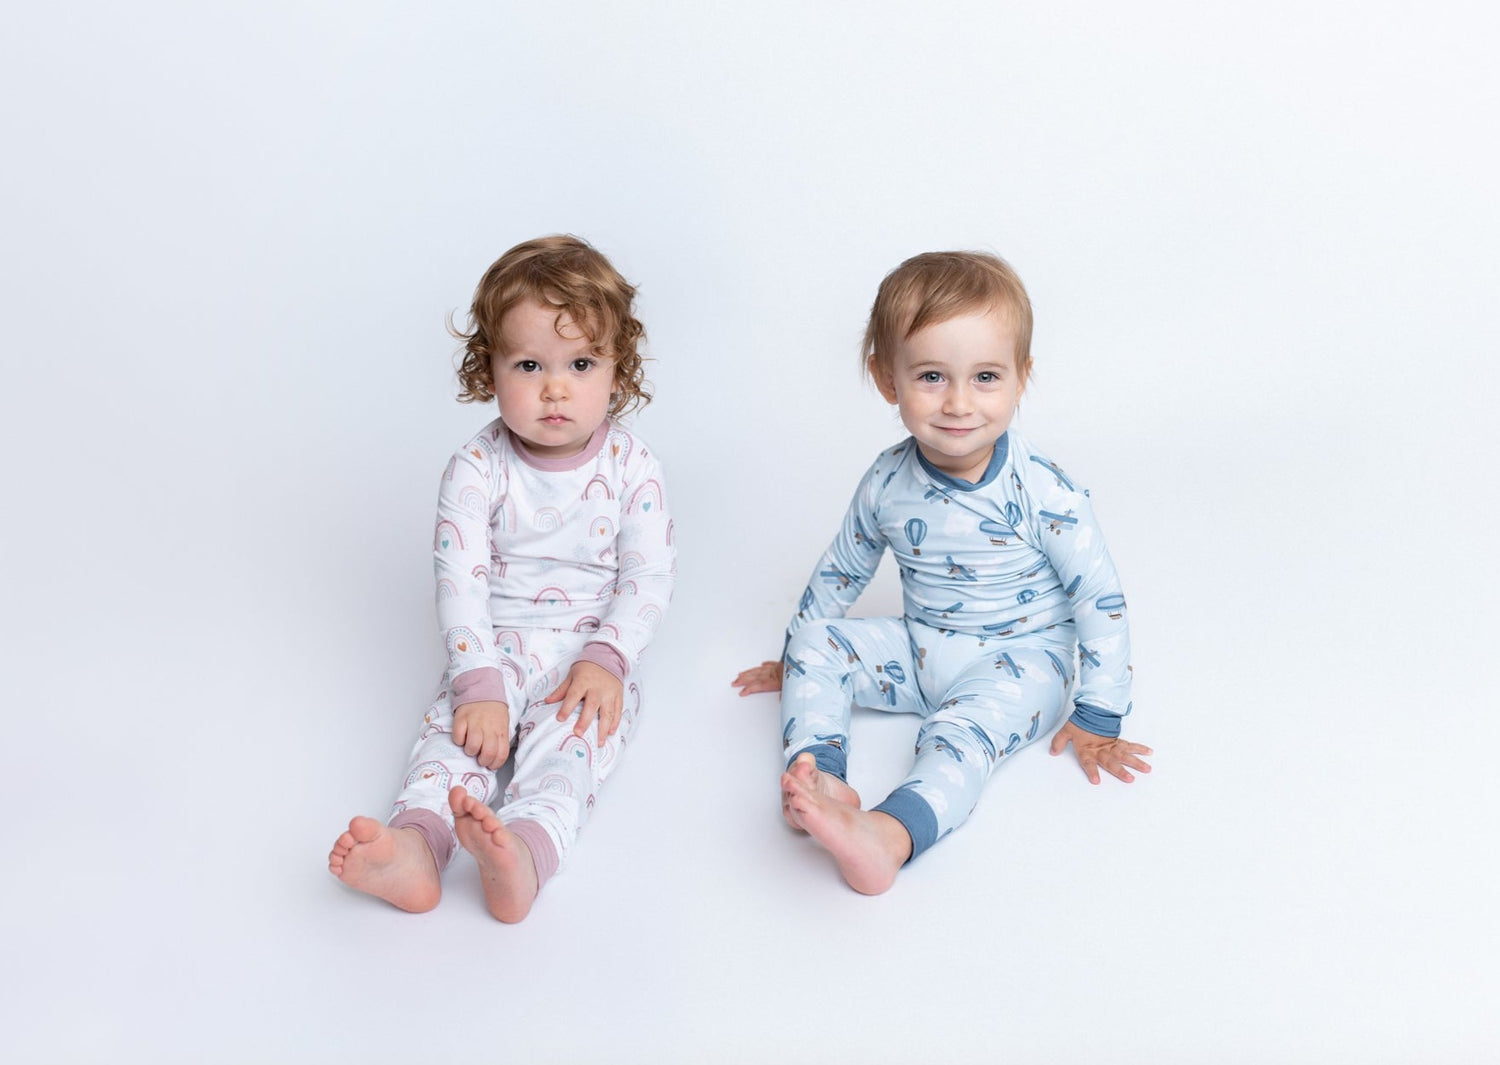 THE HONEY BOWS Pastel Pups Two Piece Bamboo Pajamas - Amber Marie